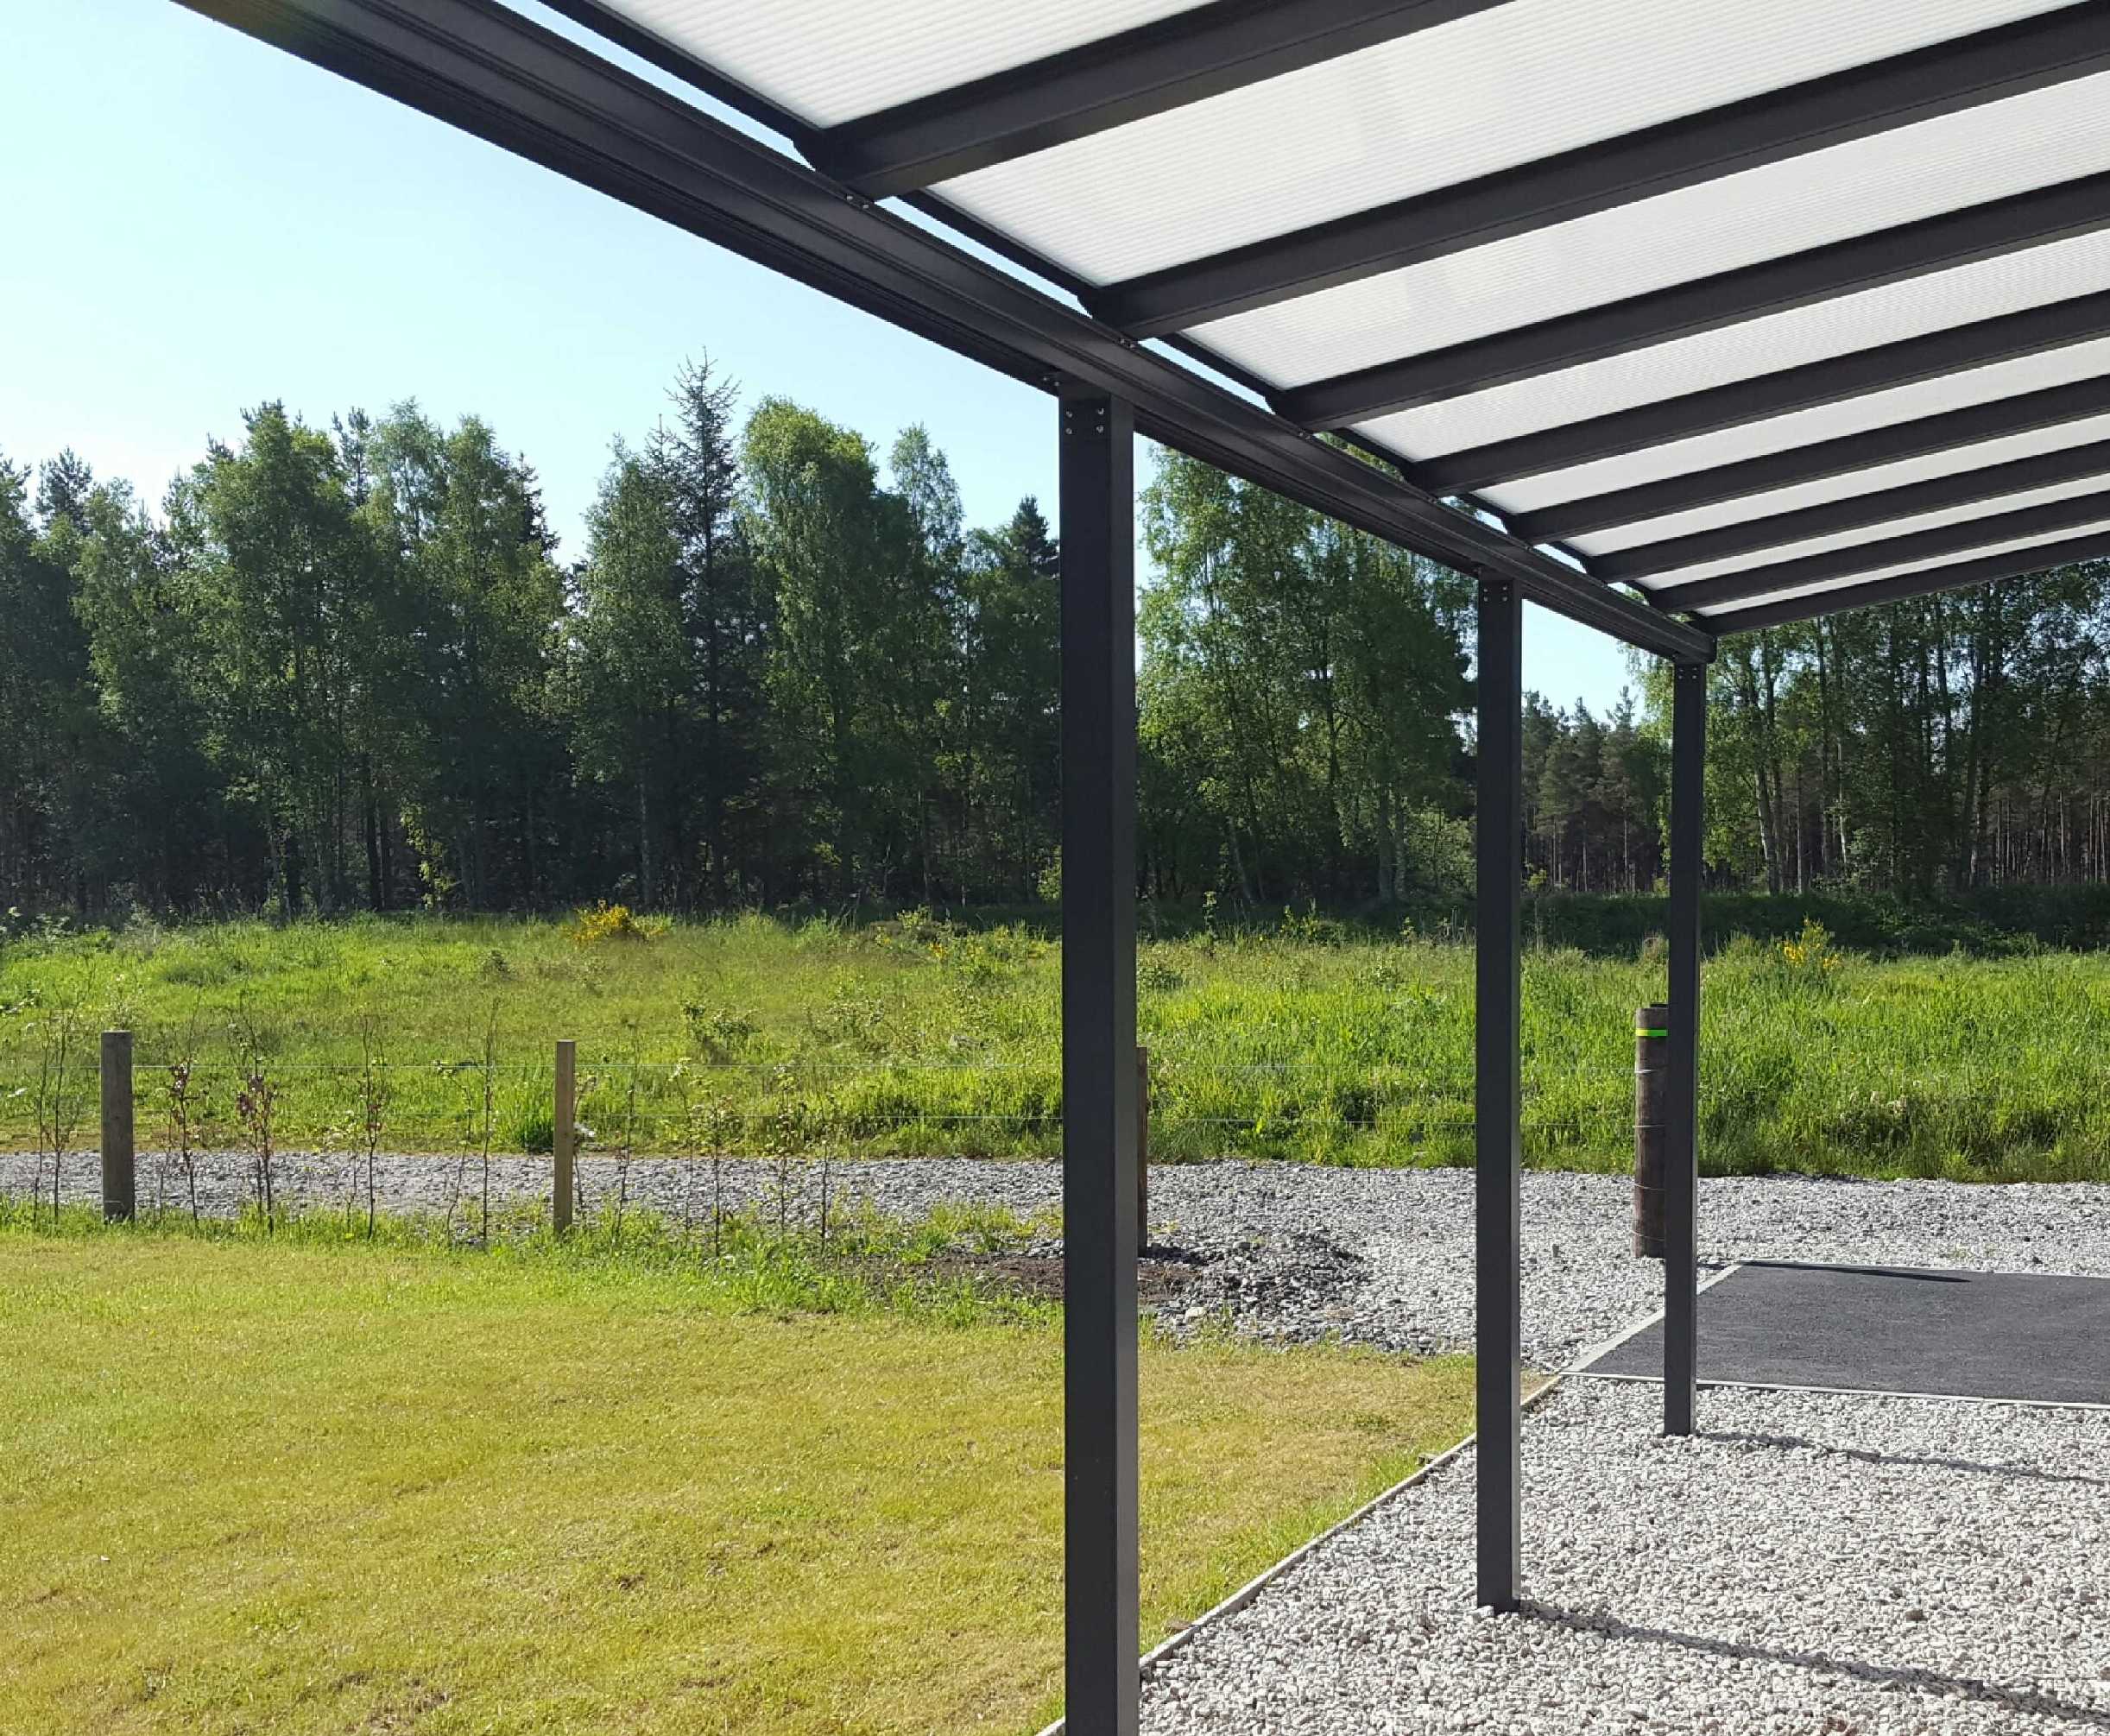 Omega Smart Lean-To Canopy, Anthracite Grey, 6mm Glass Clear Plate Polycarbonate Glazing - 2.1m (W) x 2.0m (P), (2) Supporting Posts